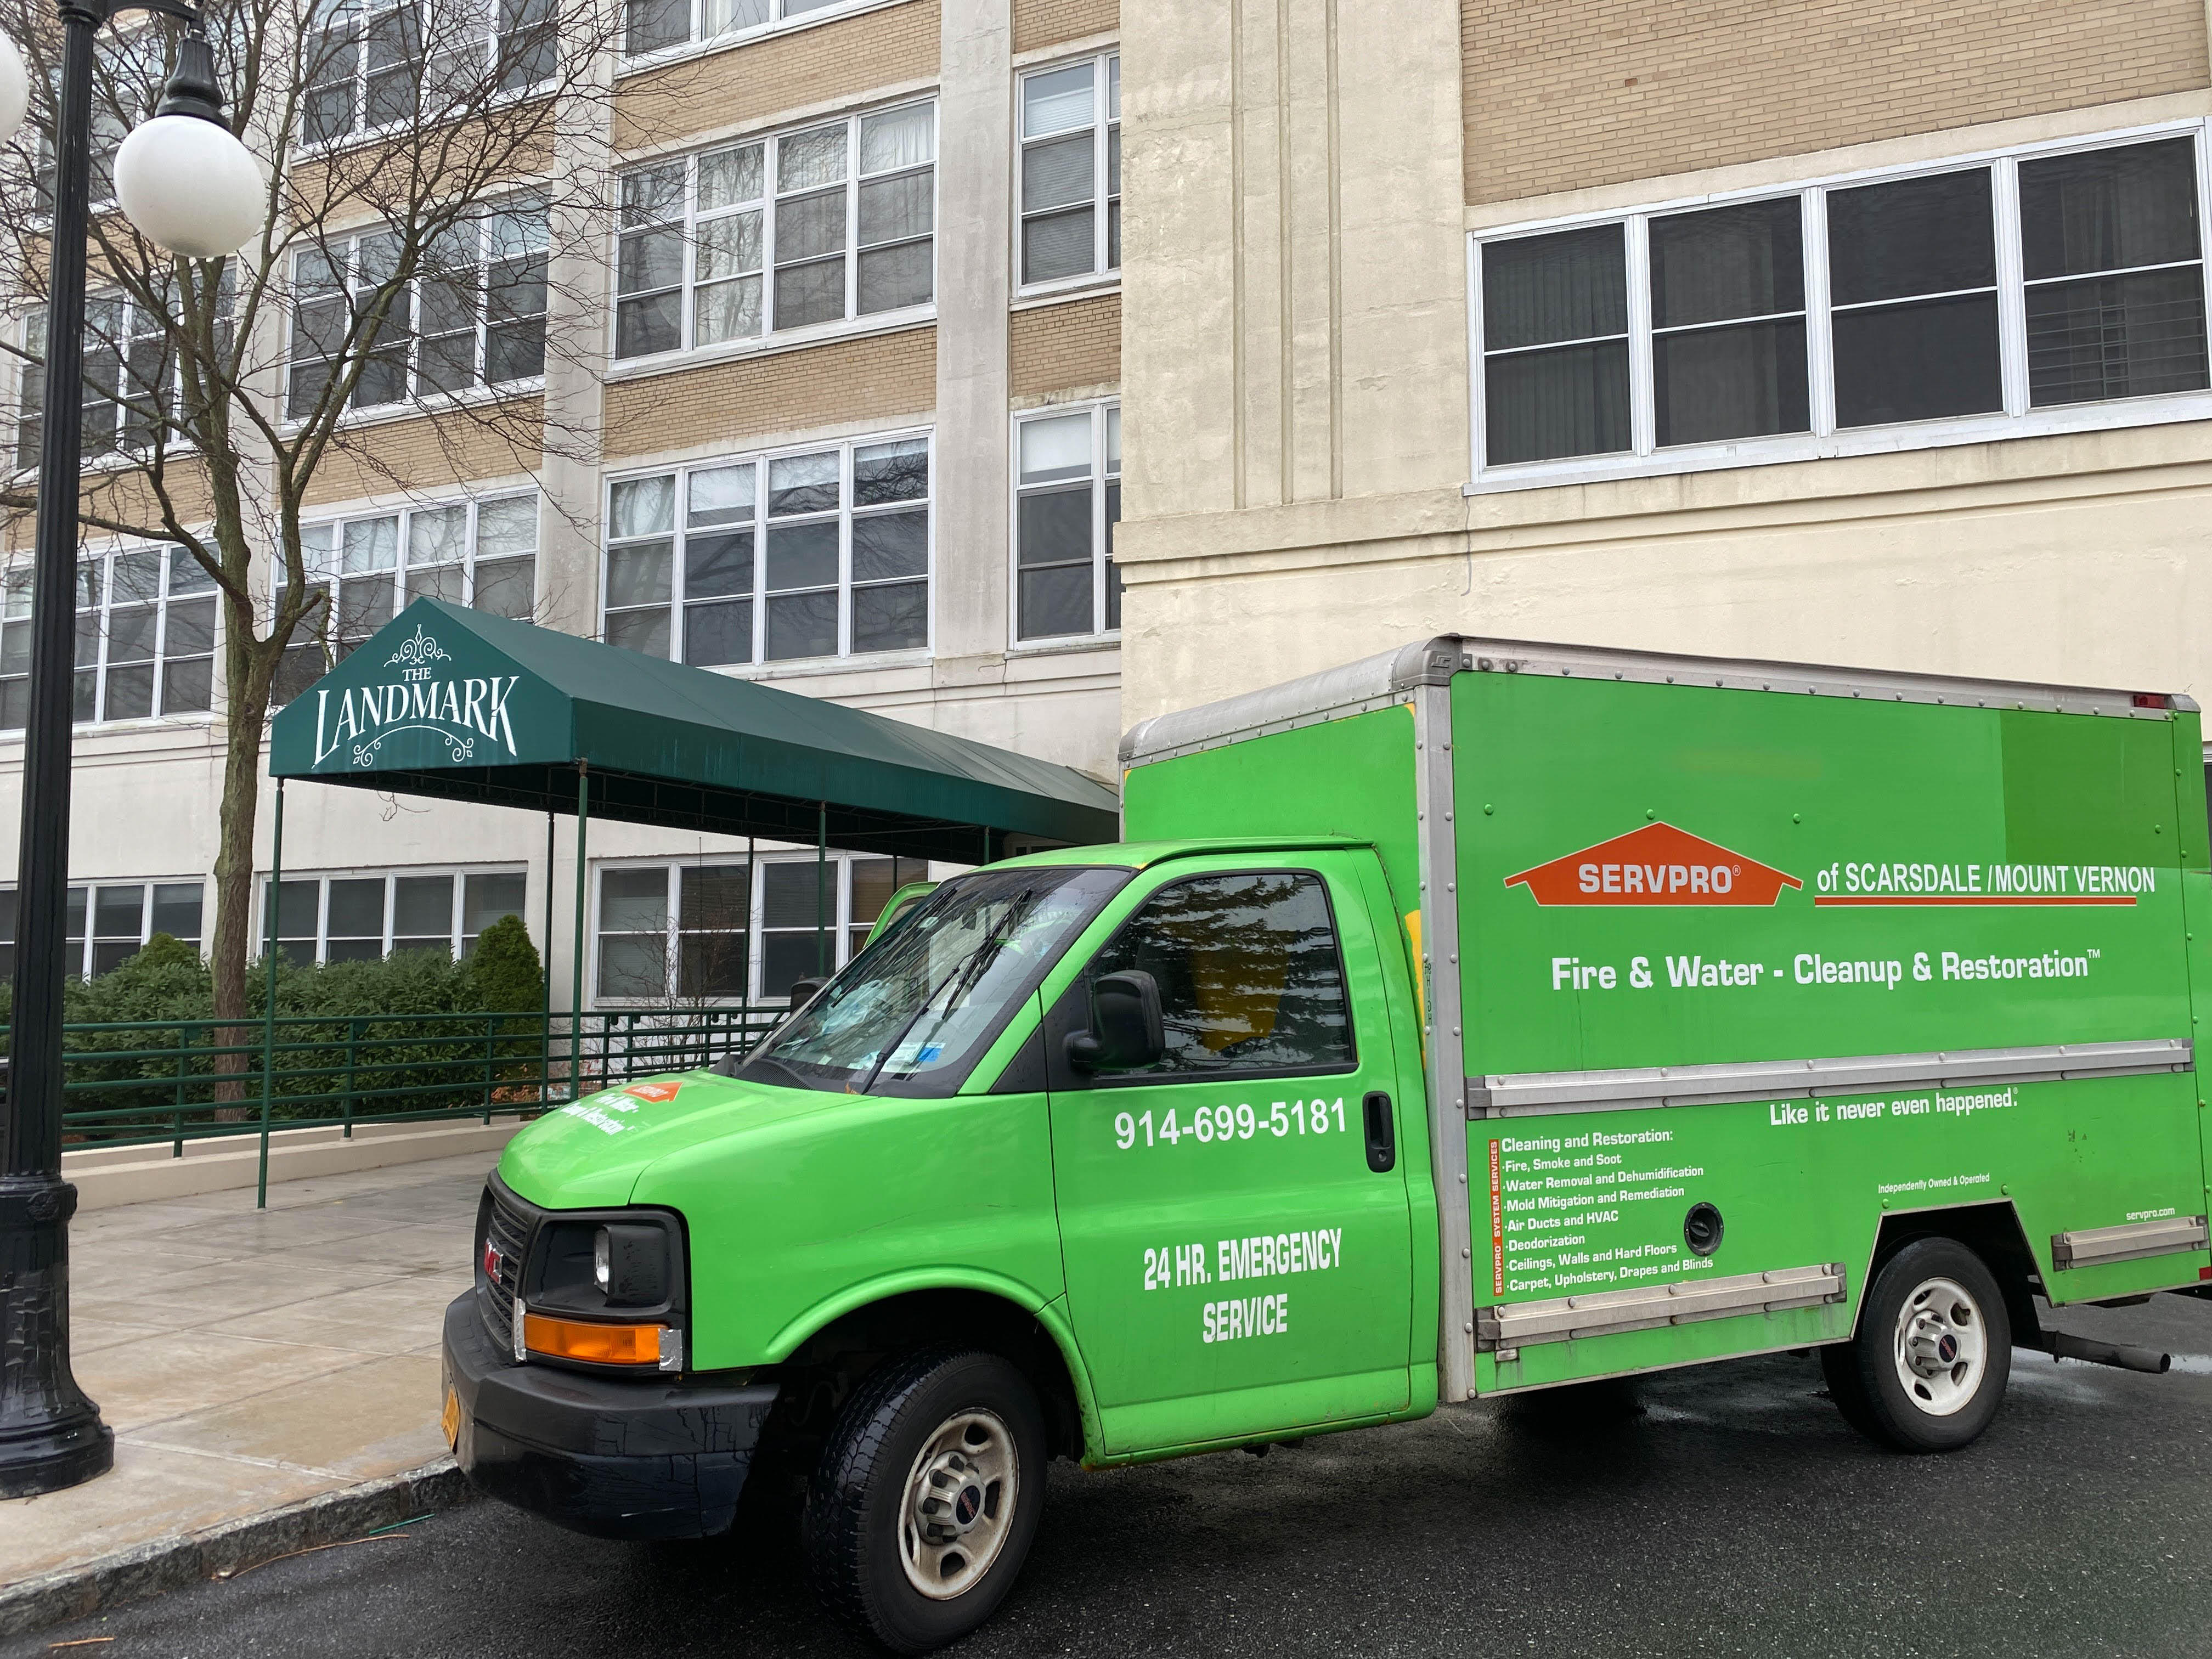 SERVPRO of Scarsdale/Mount Vernon is ready 24/7 for your restoration needs.